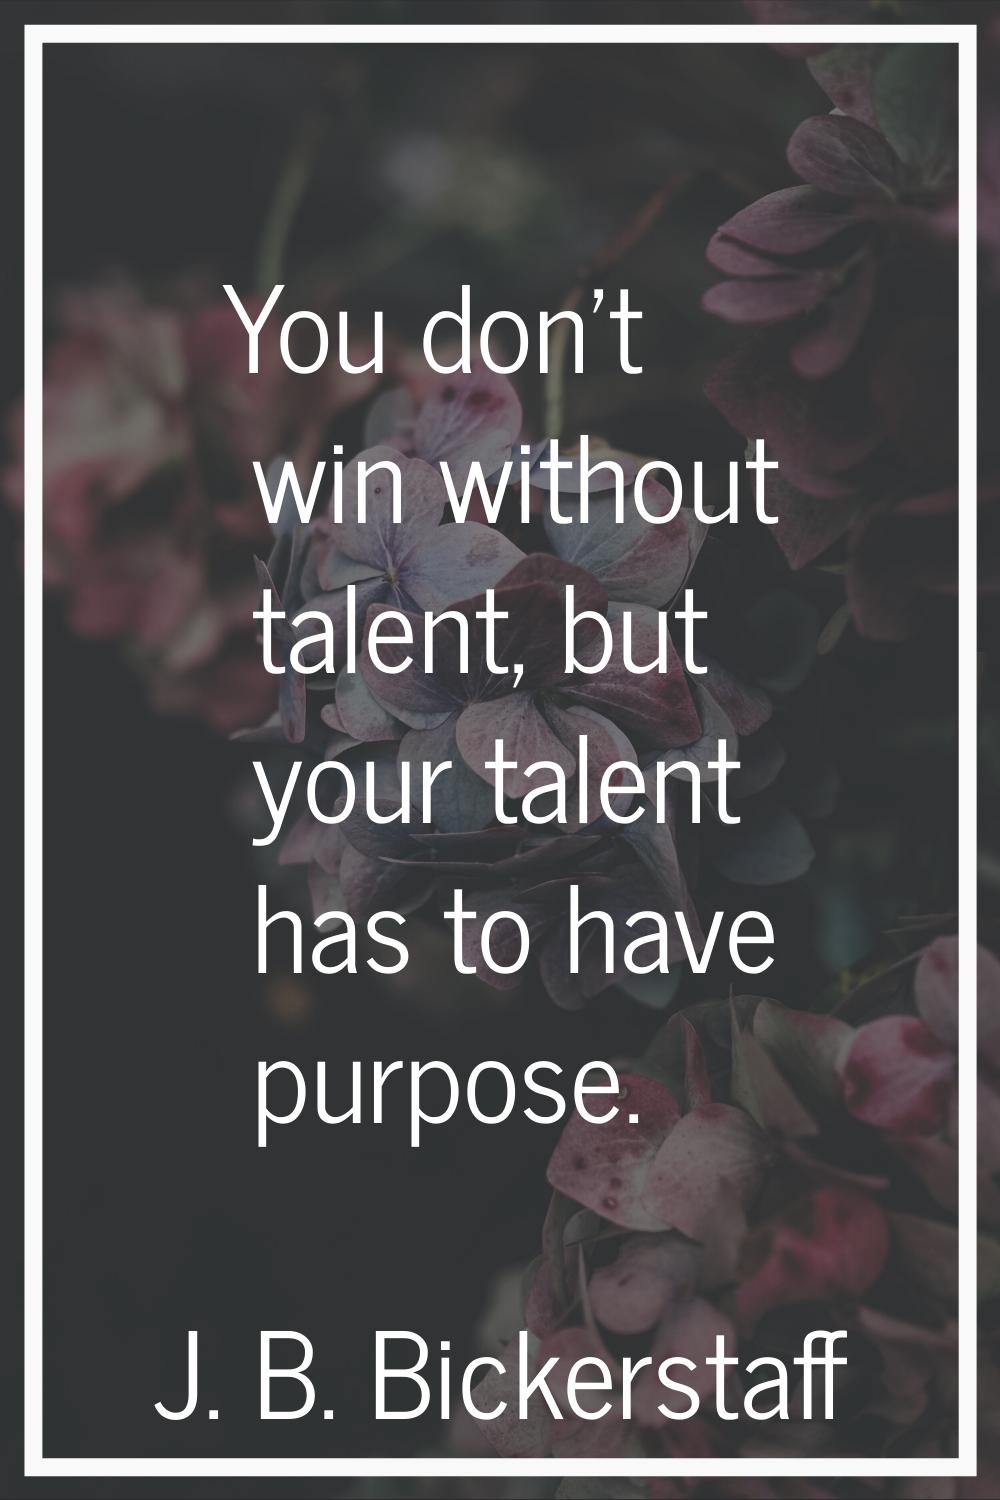 You don't win without talent, but your talent has to have purpose.